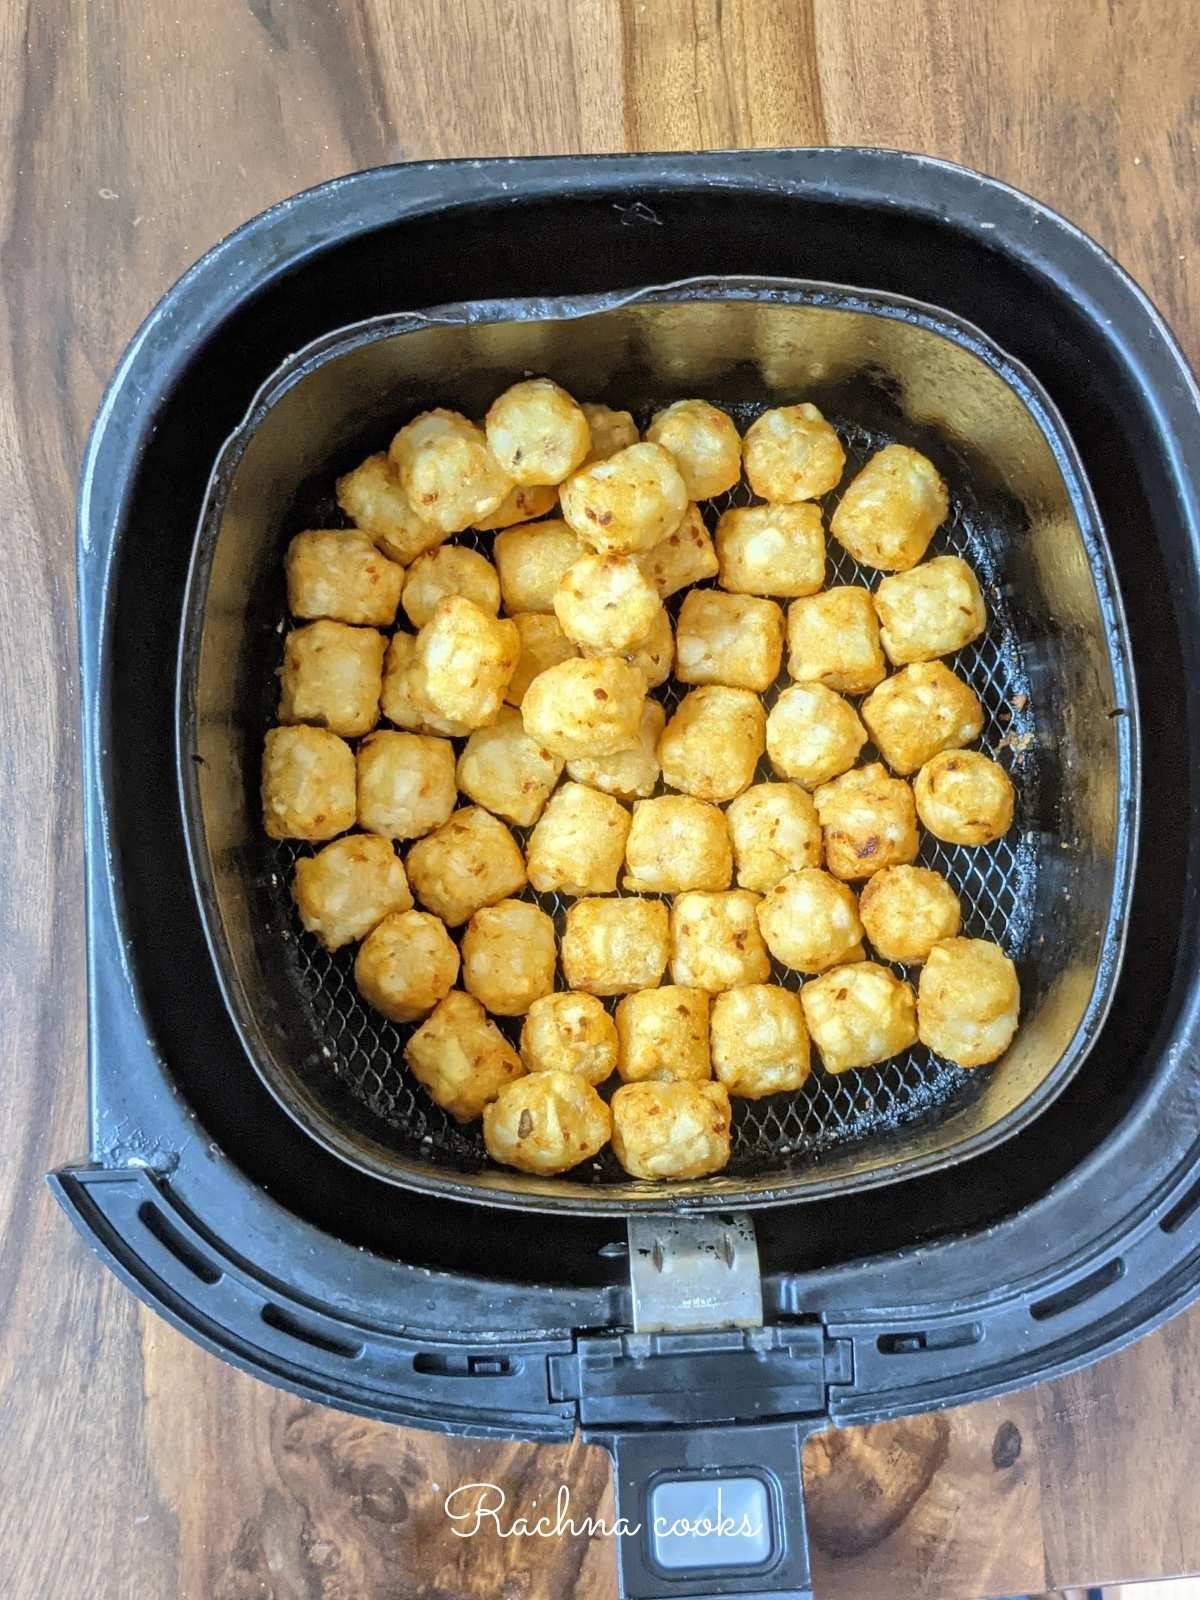 Tater tots for reheating in air fryer